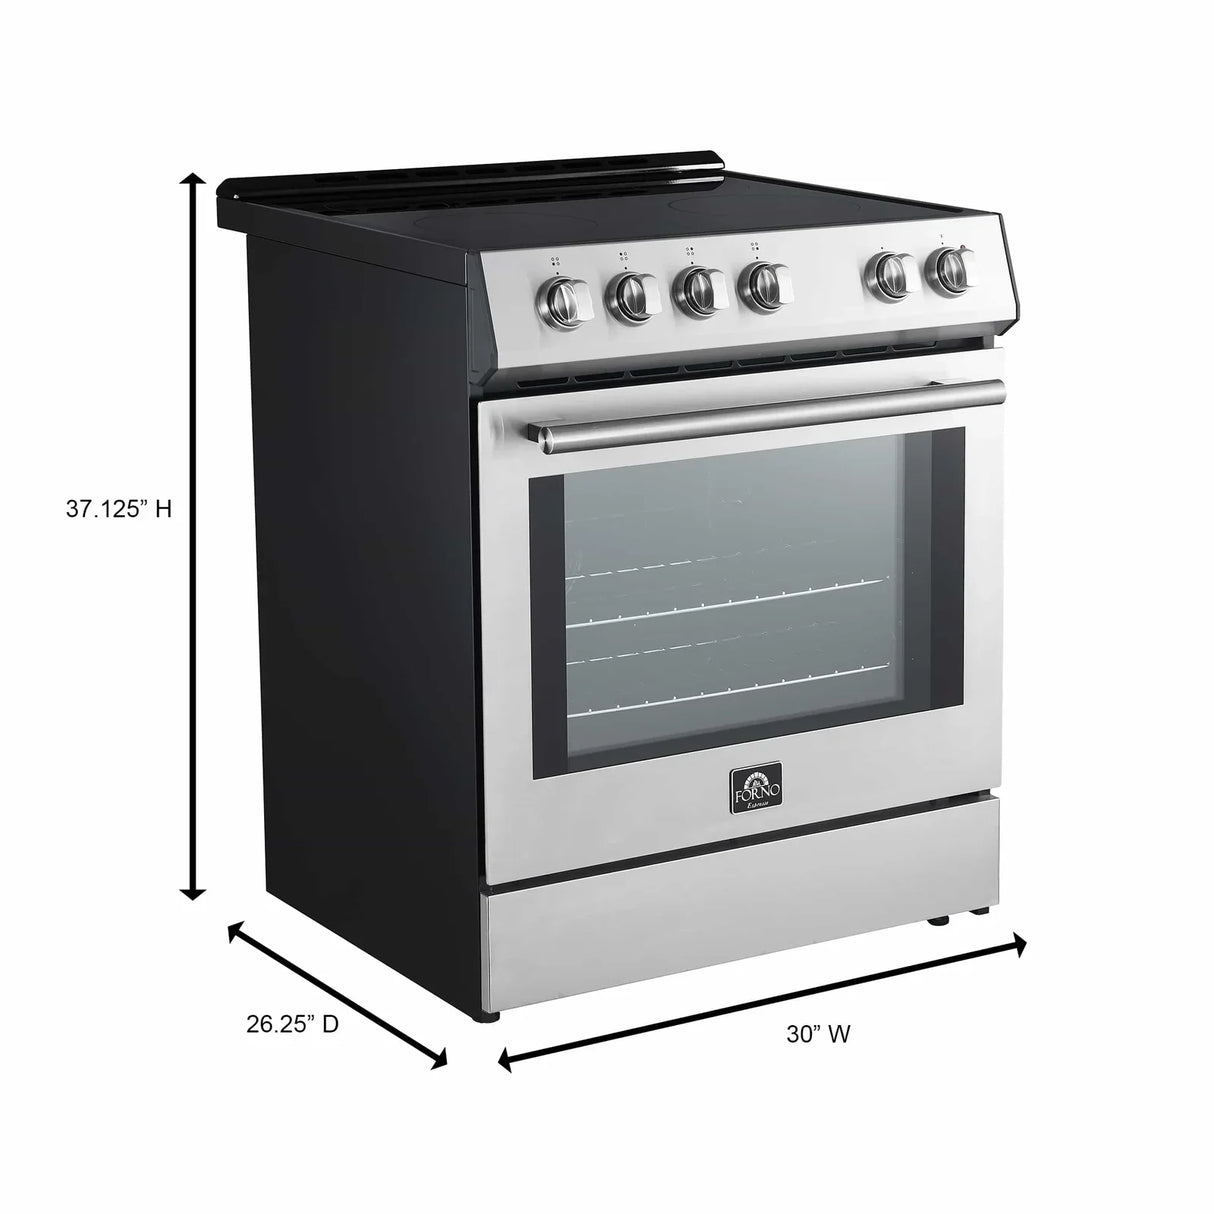 Forno Espresso 2-Piece Appliance Package - 30-Inch Electric Range with 5.0 Cu.Ft. Electric Oven and Under Cabinet Range Hood in Stainless Steel